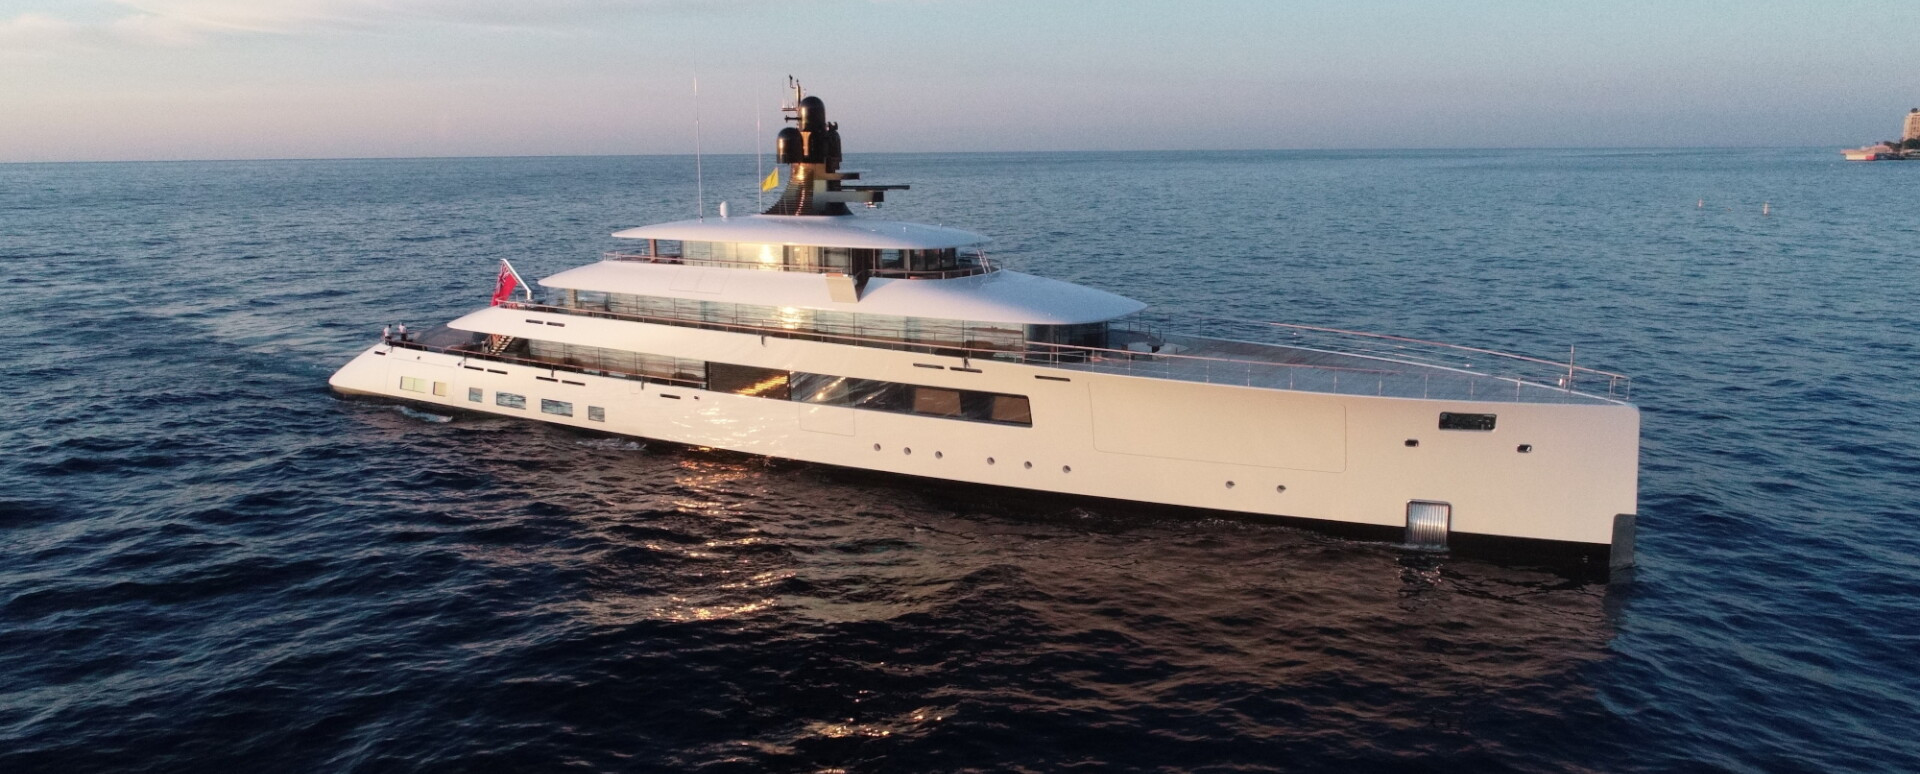                                                                                                     KK Superyachts proudly announces the delivery of 77.25m Feadship M/Y SYZYGY 818
                                                                                            